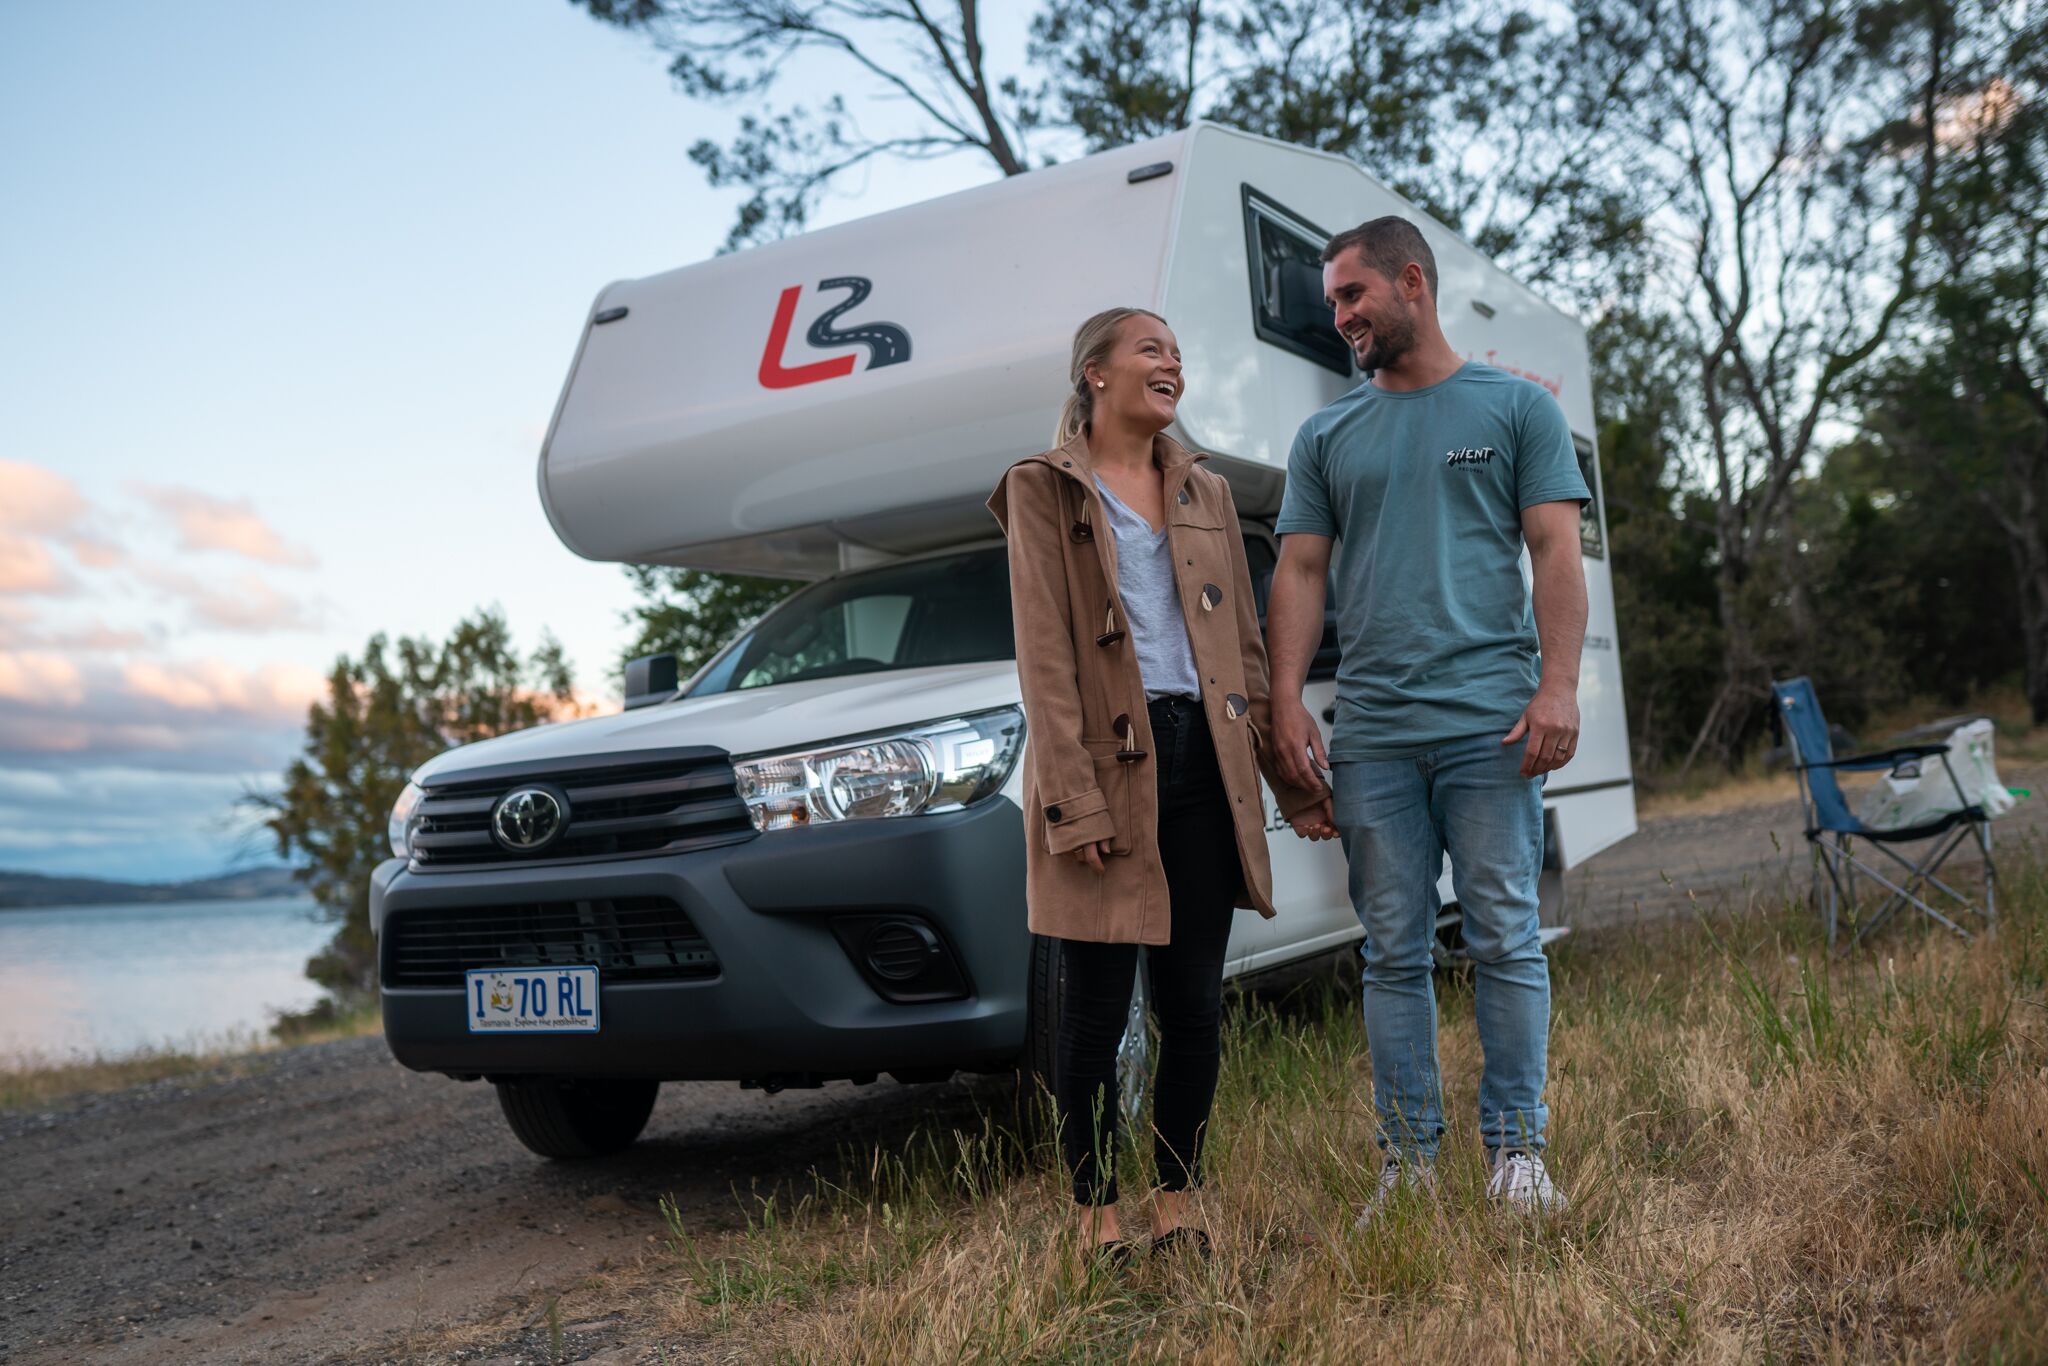 couple at front of motorhome